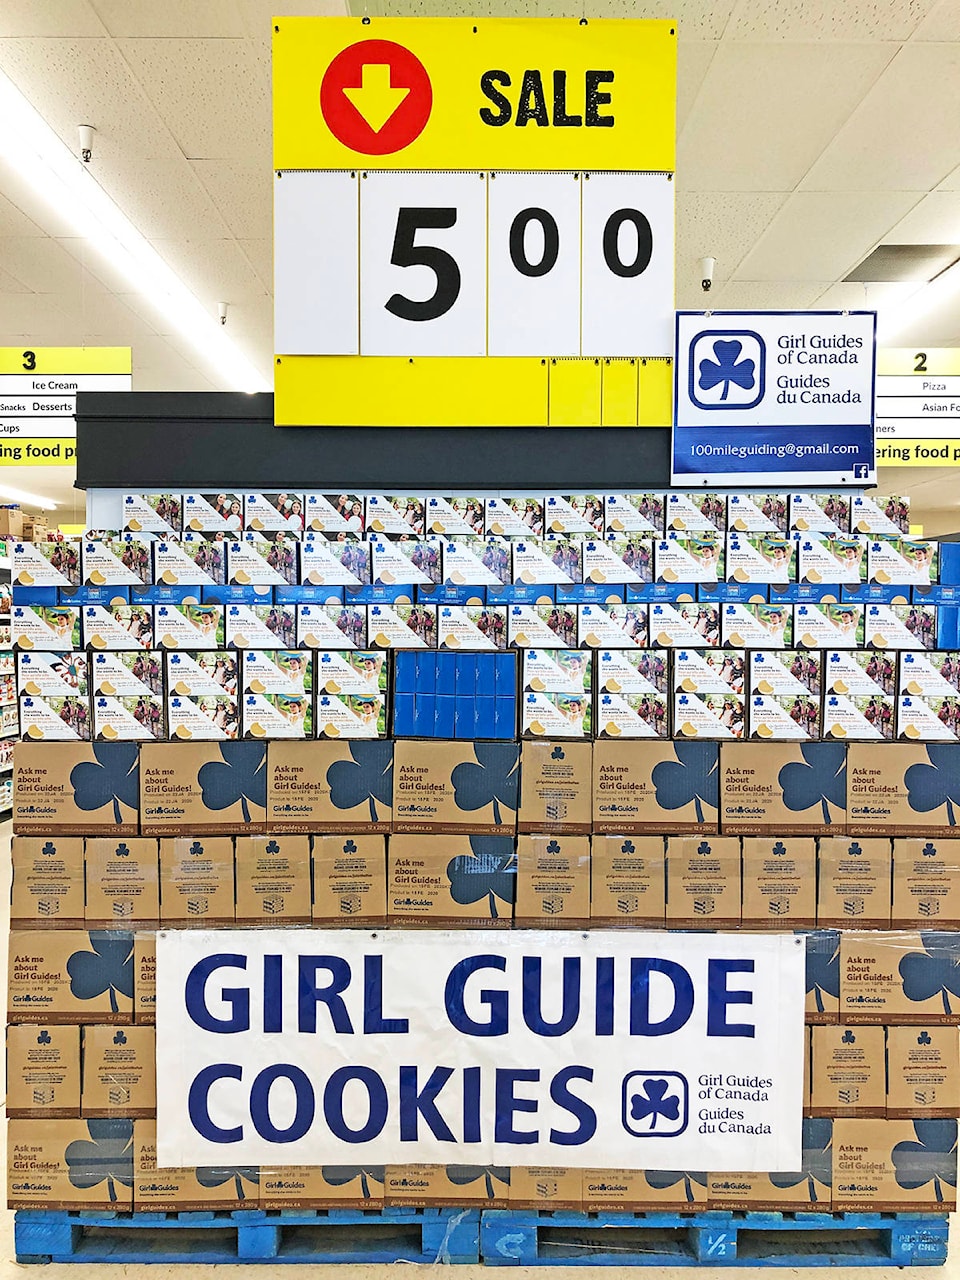 21093774_web1_Freshco-Selling-Girl-Guide-Cookiees_1